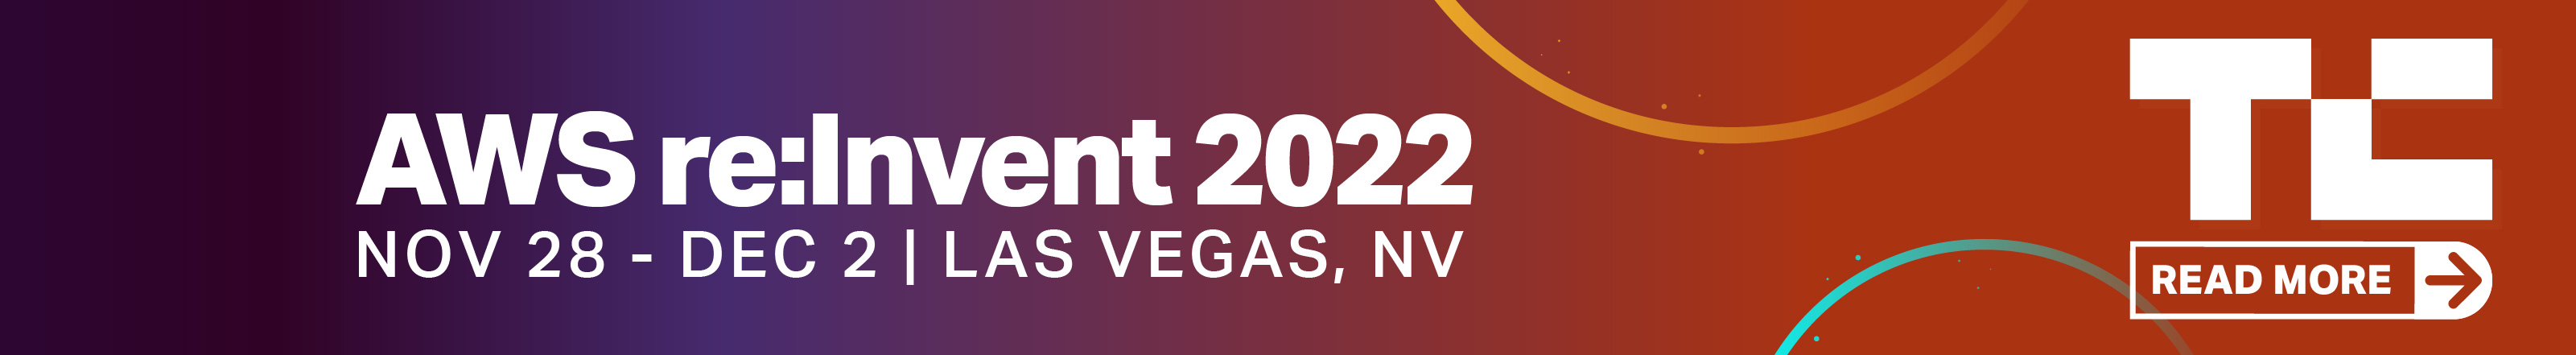 Learn more about AWS re:Invent 2022 on TechCrunch